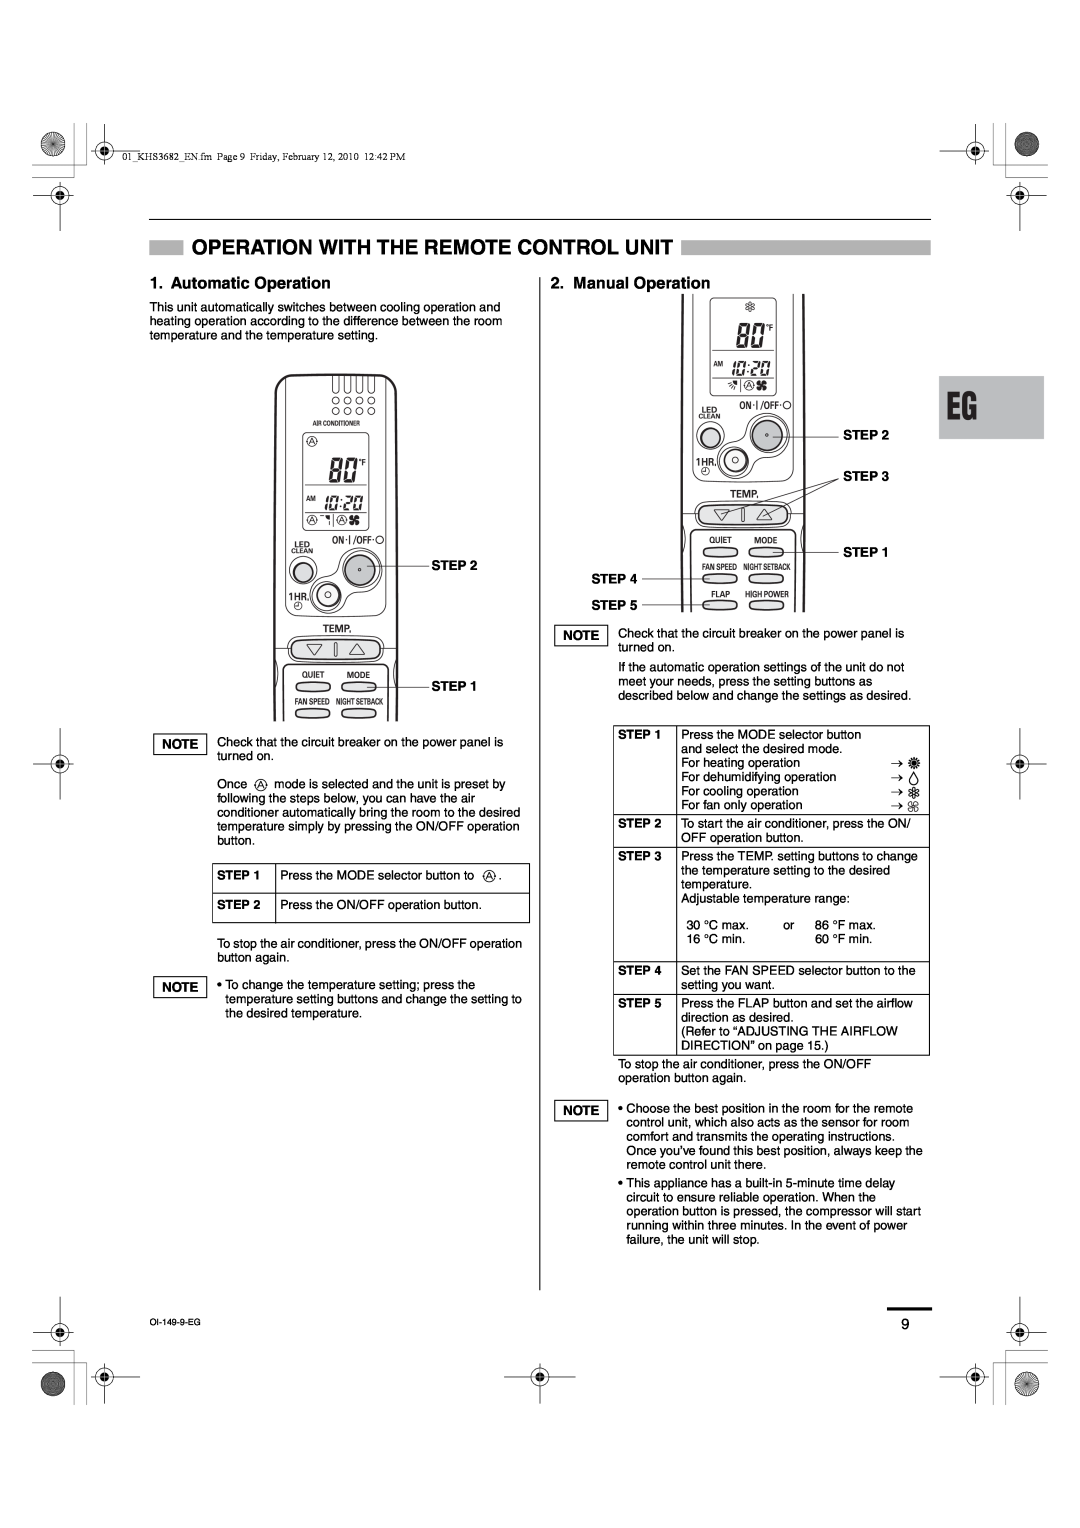 Sanyo KHS3082, KHS3682 instruction manual Operation With The Remote Control Unit, Automatic Operation, Manual Operation 